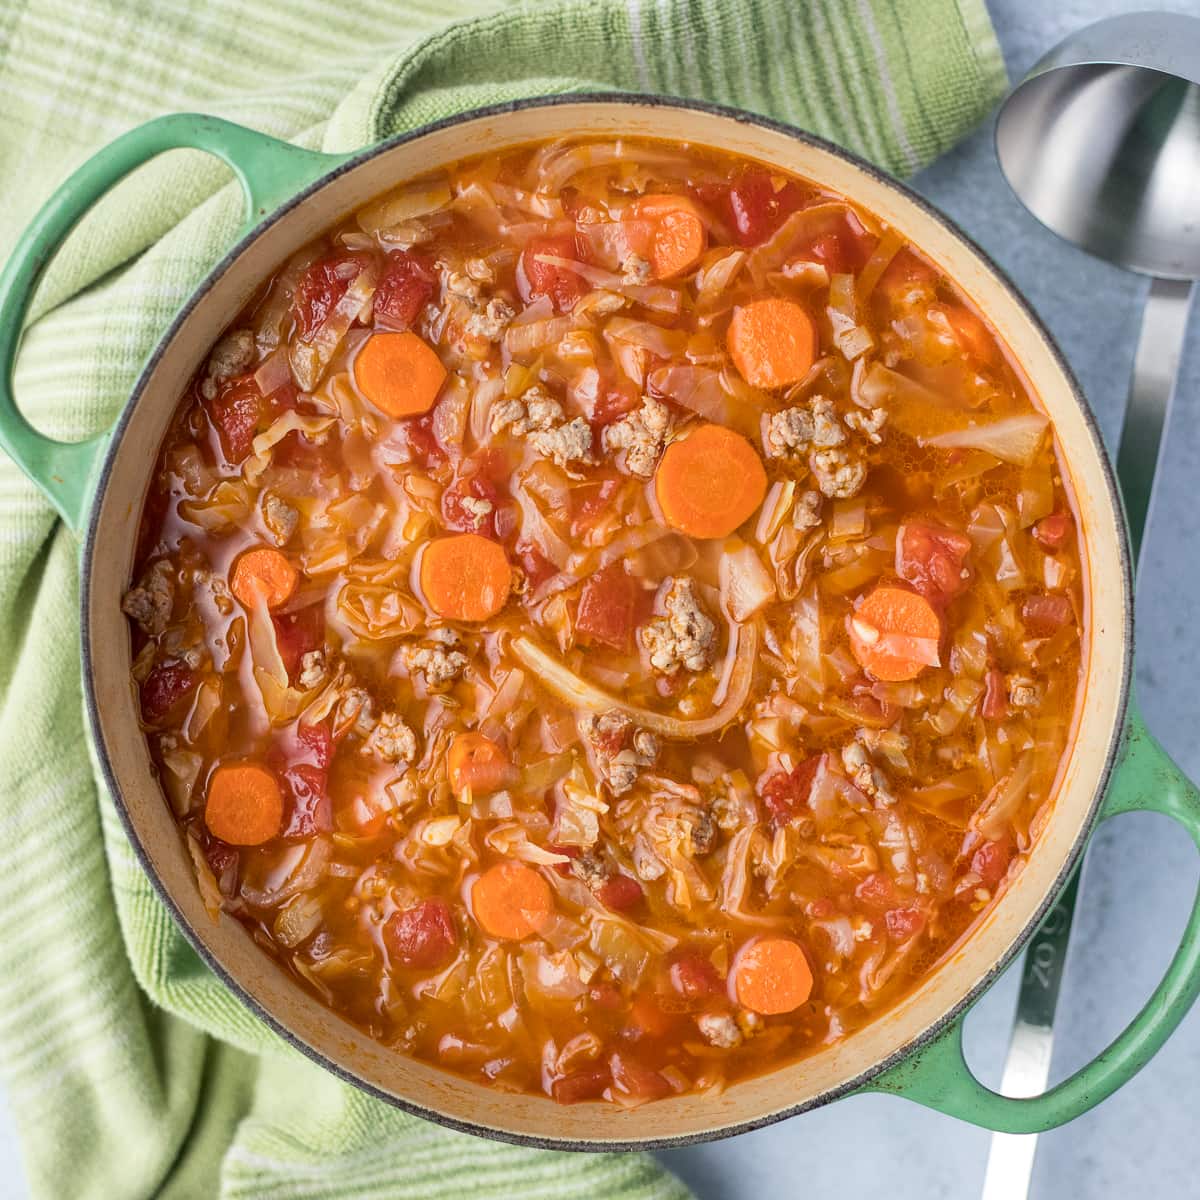 Italian Sausage and Cabbage Soup